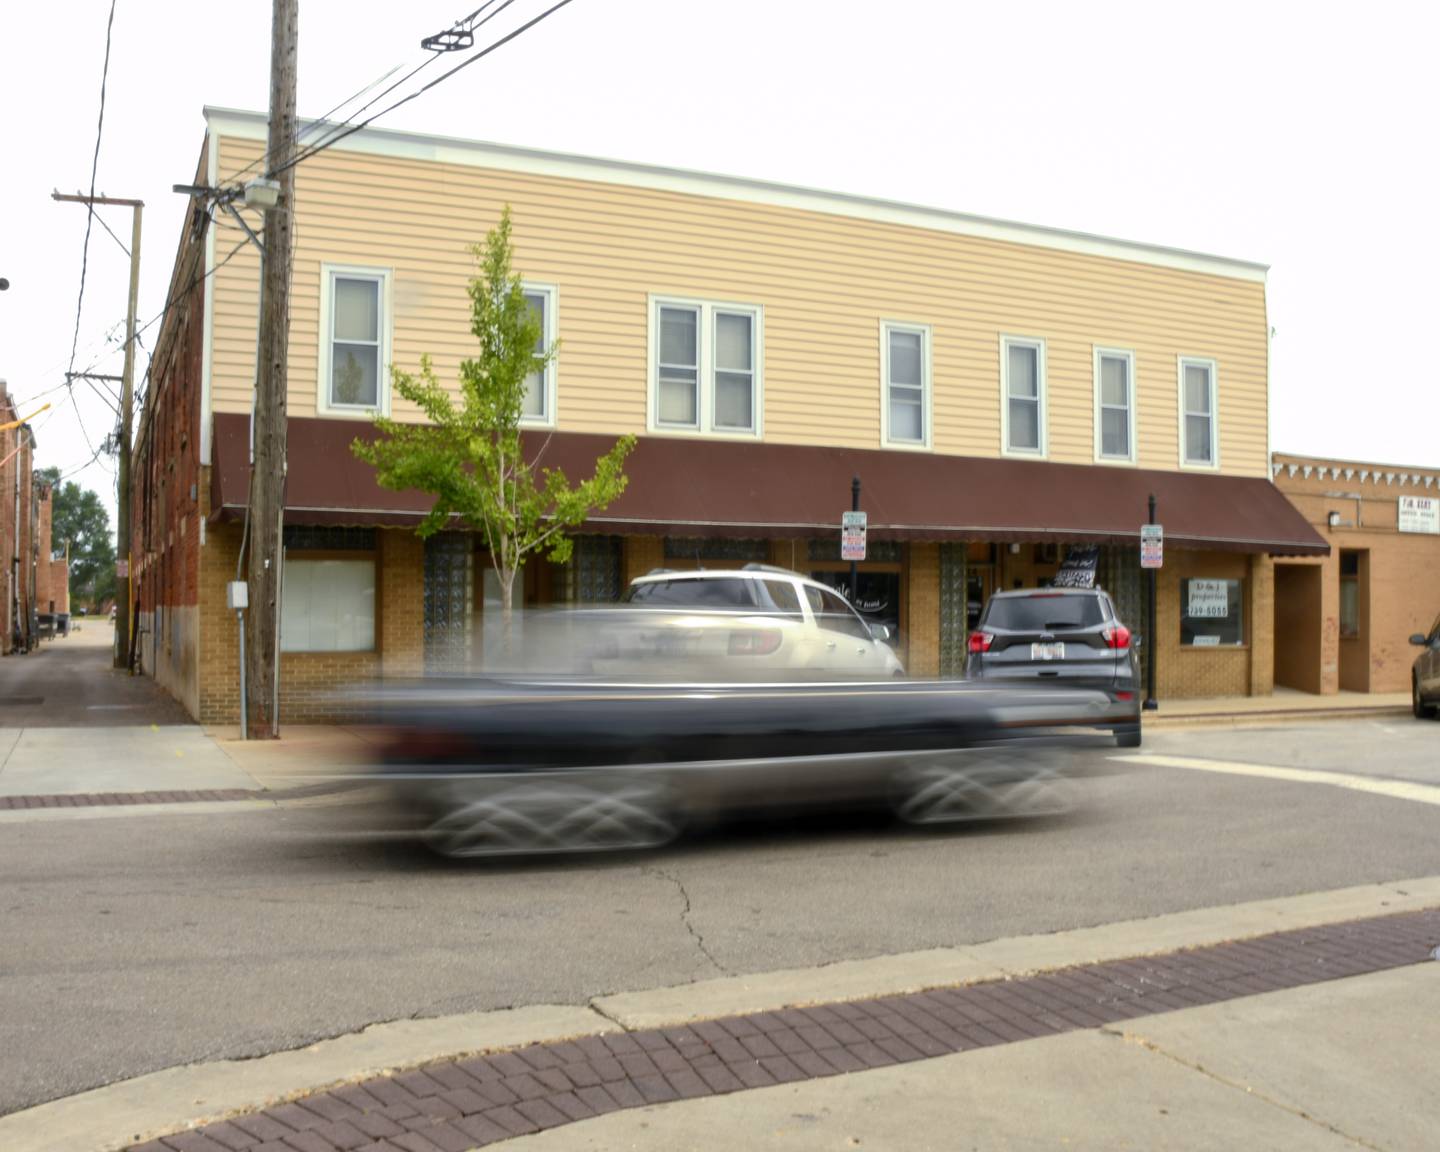 On Wednesday July 5, 2023 a car passes a 133 year old building on 2nd Street in DeKalb that has been talked about being torn down for a parking lot.